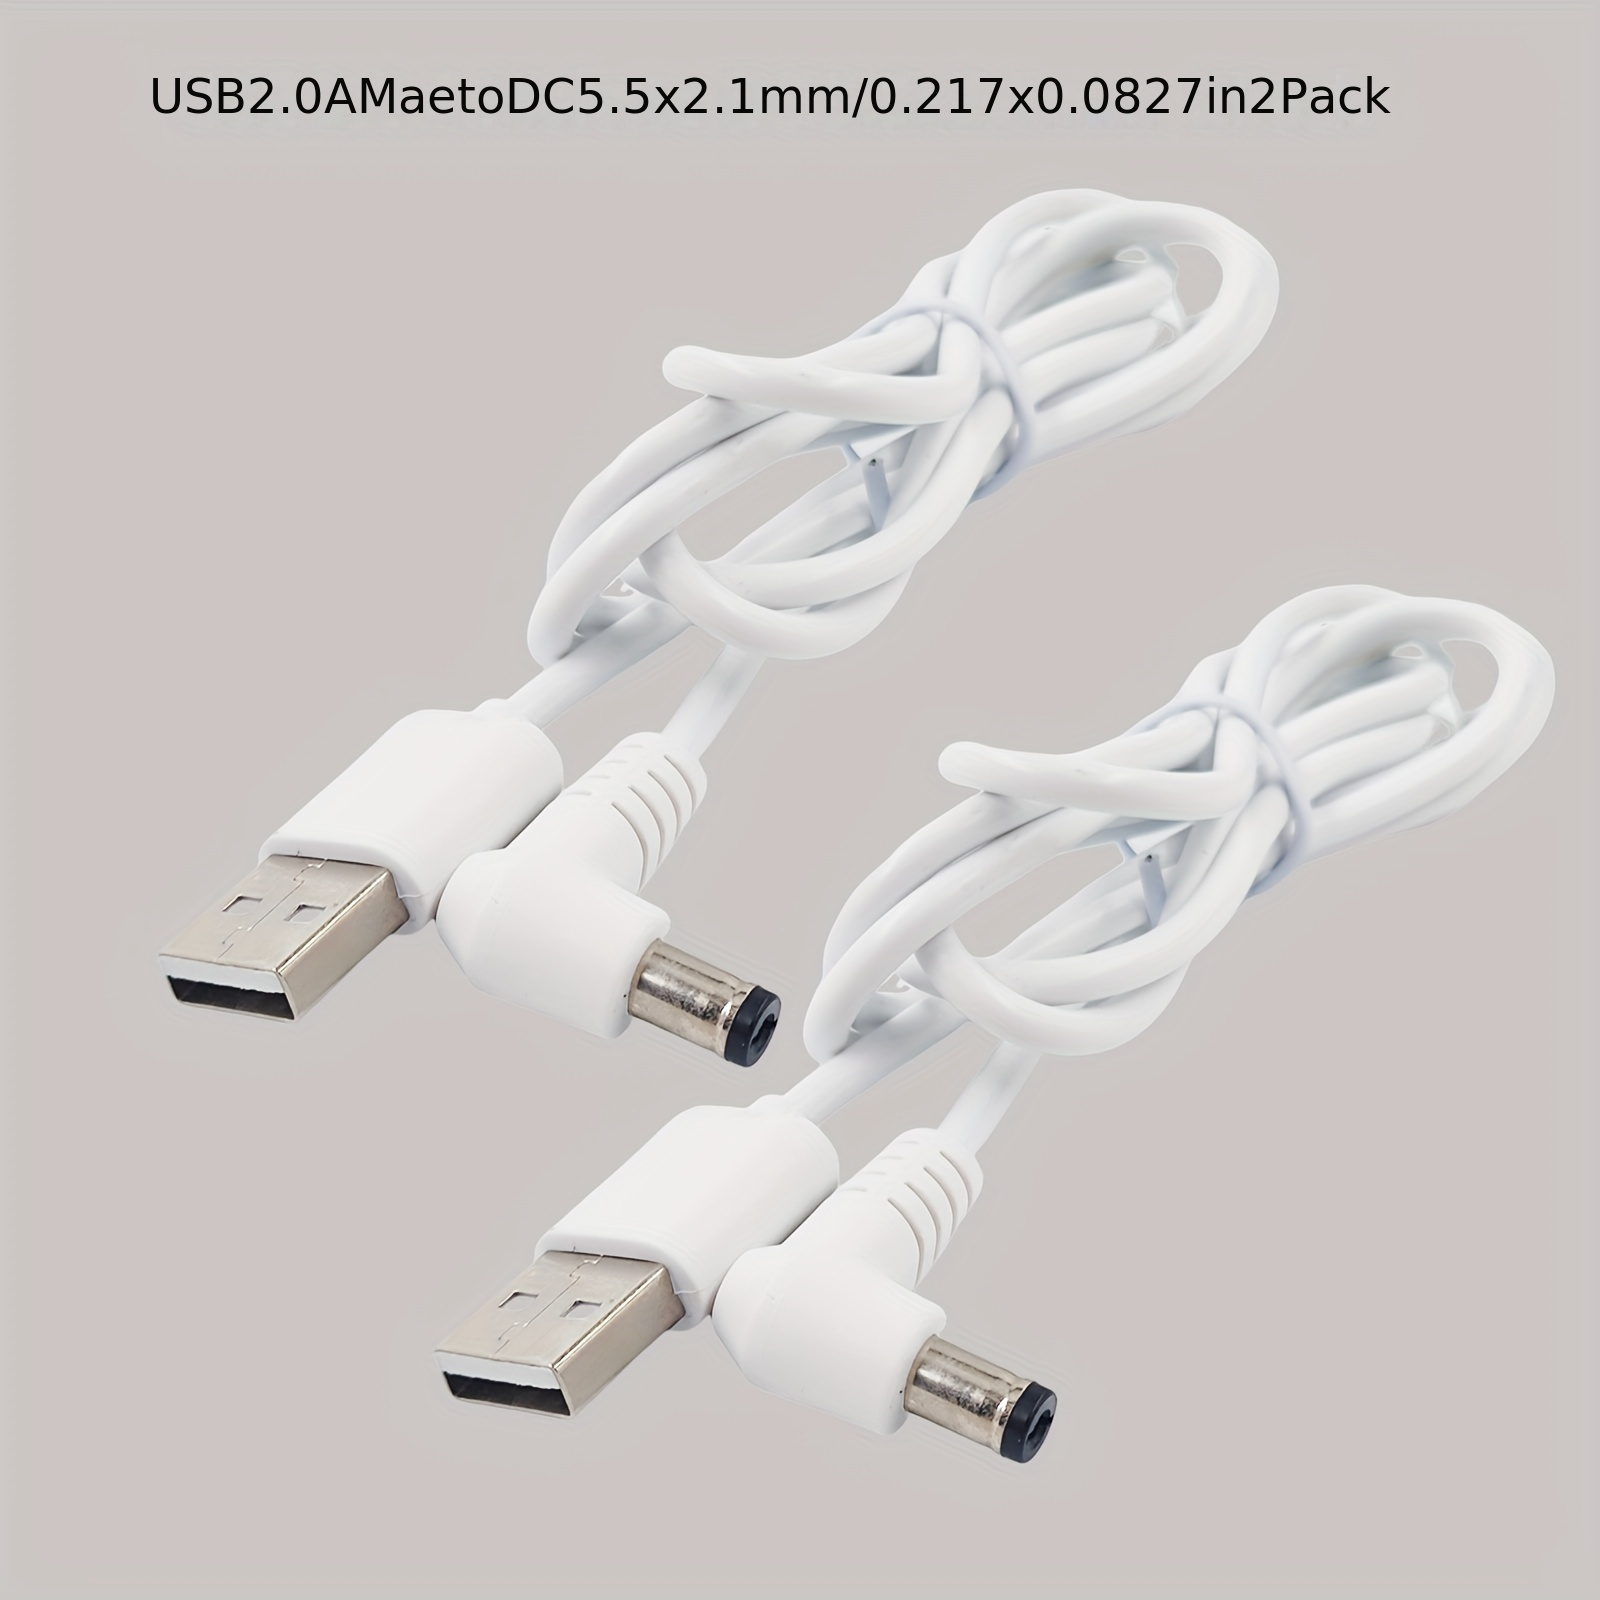 USB Port to 3.5 mm x 1.35 mm 5V DC Type M Barrel Jack Power Cable Connector  1 Meter 3 Feet Length